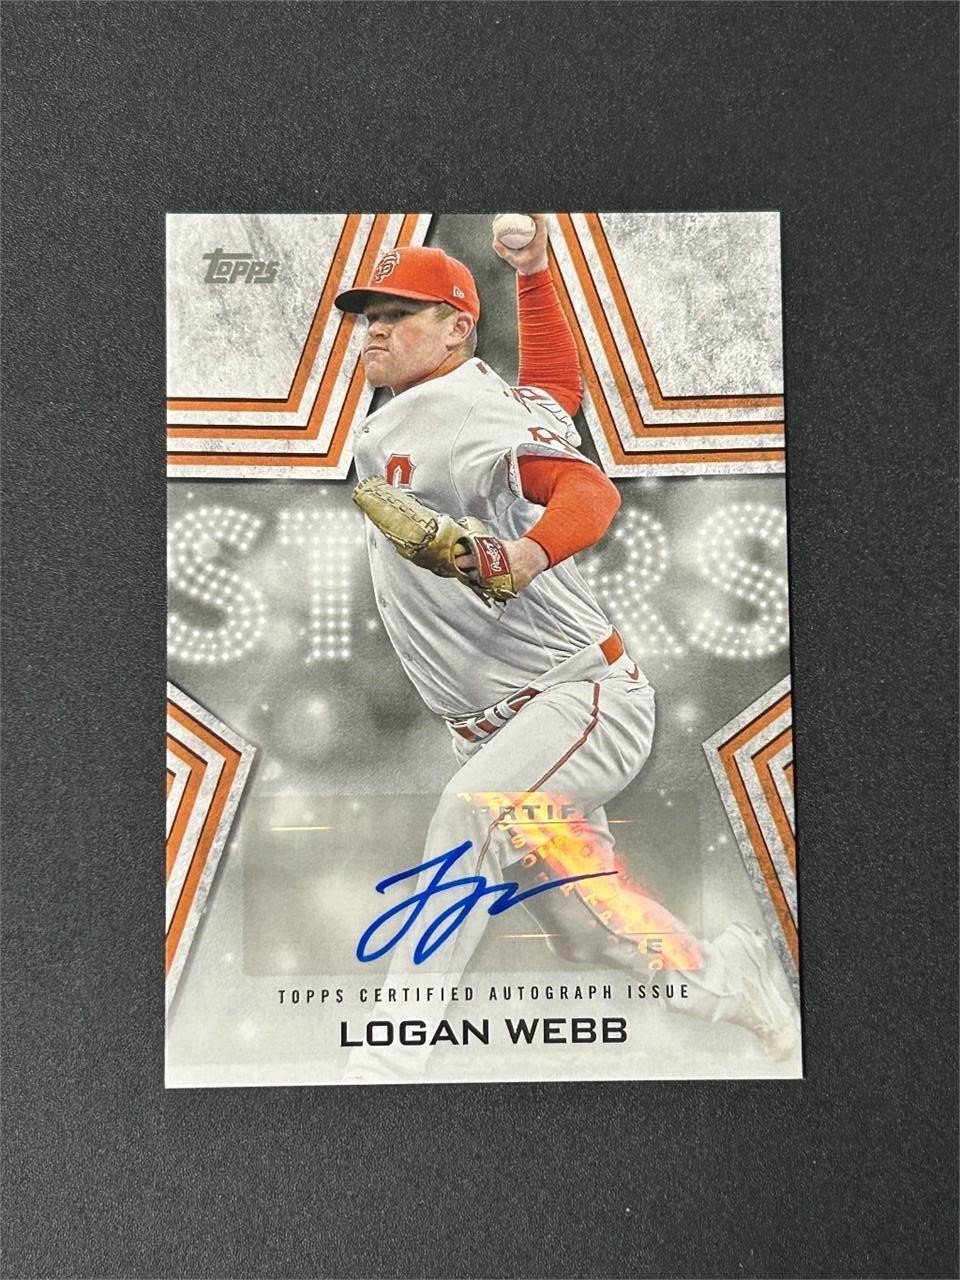 April 22nd Sports Card Auction